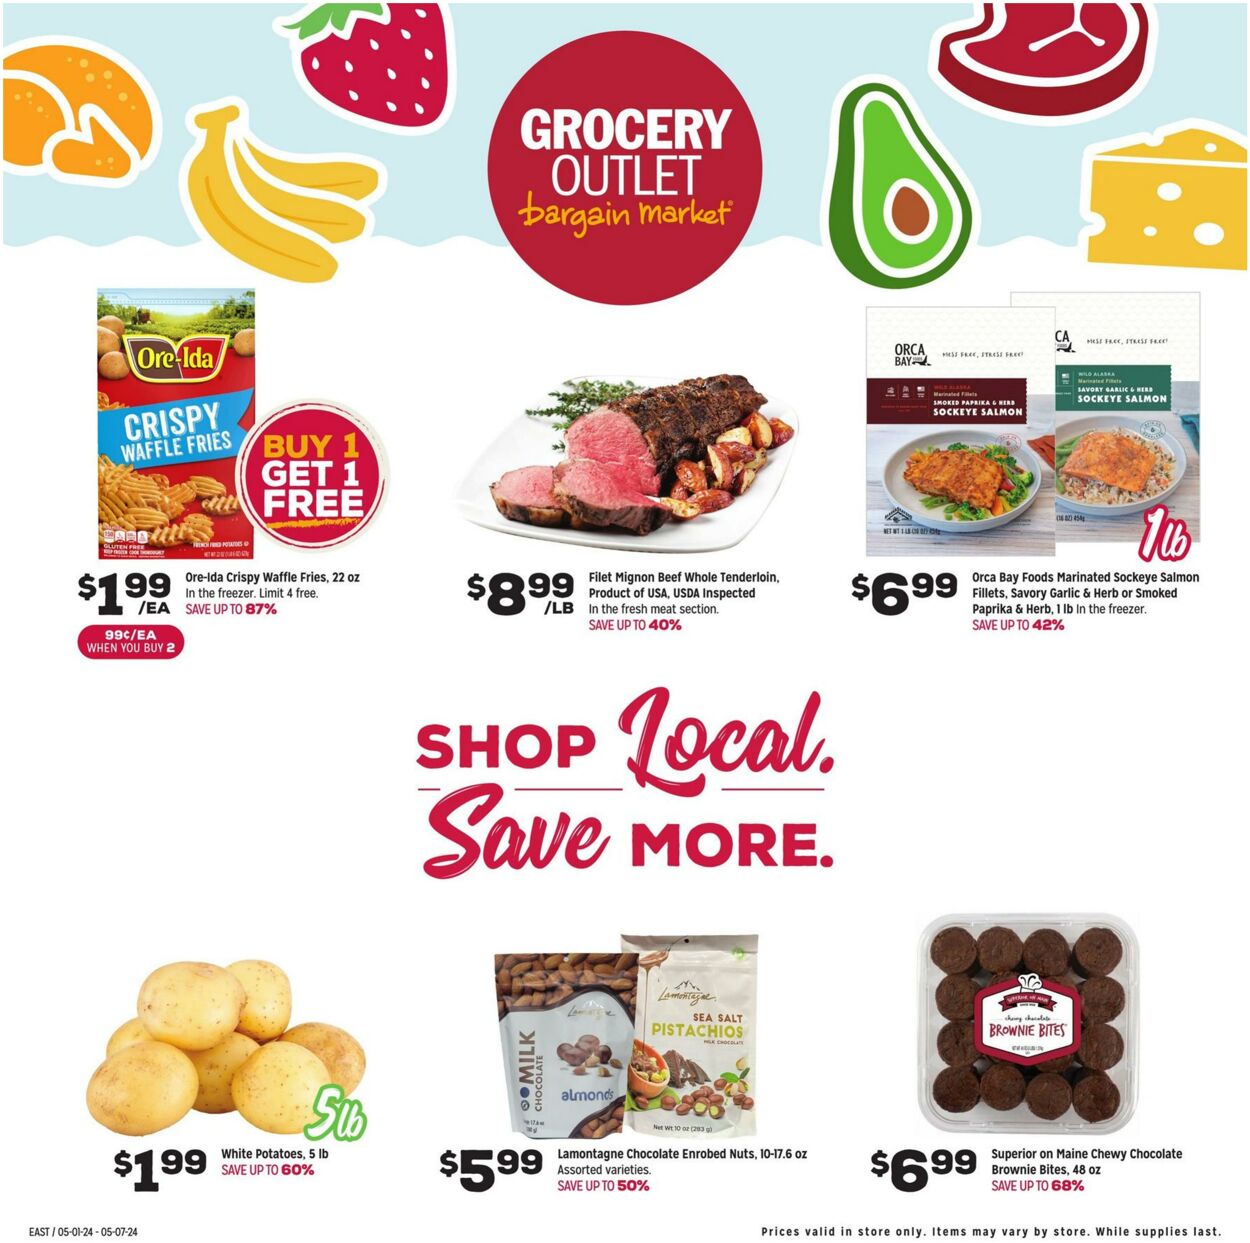 Grocery Outlet Promotional weekly ads